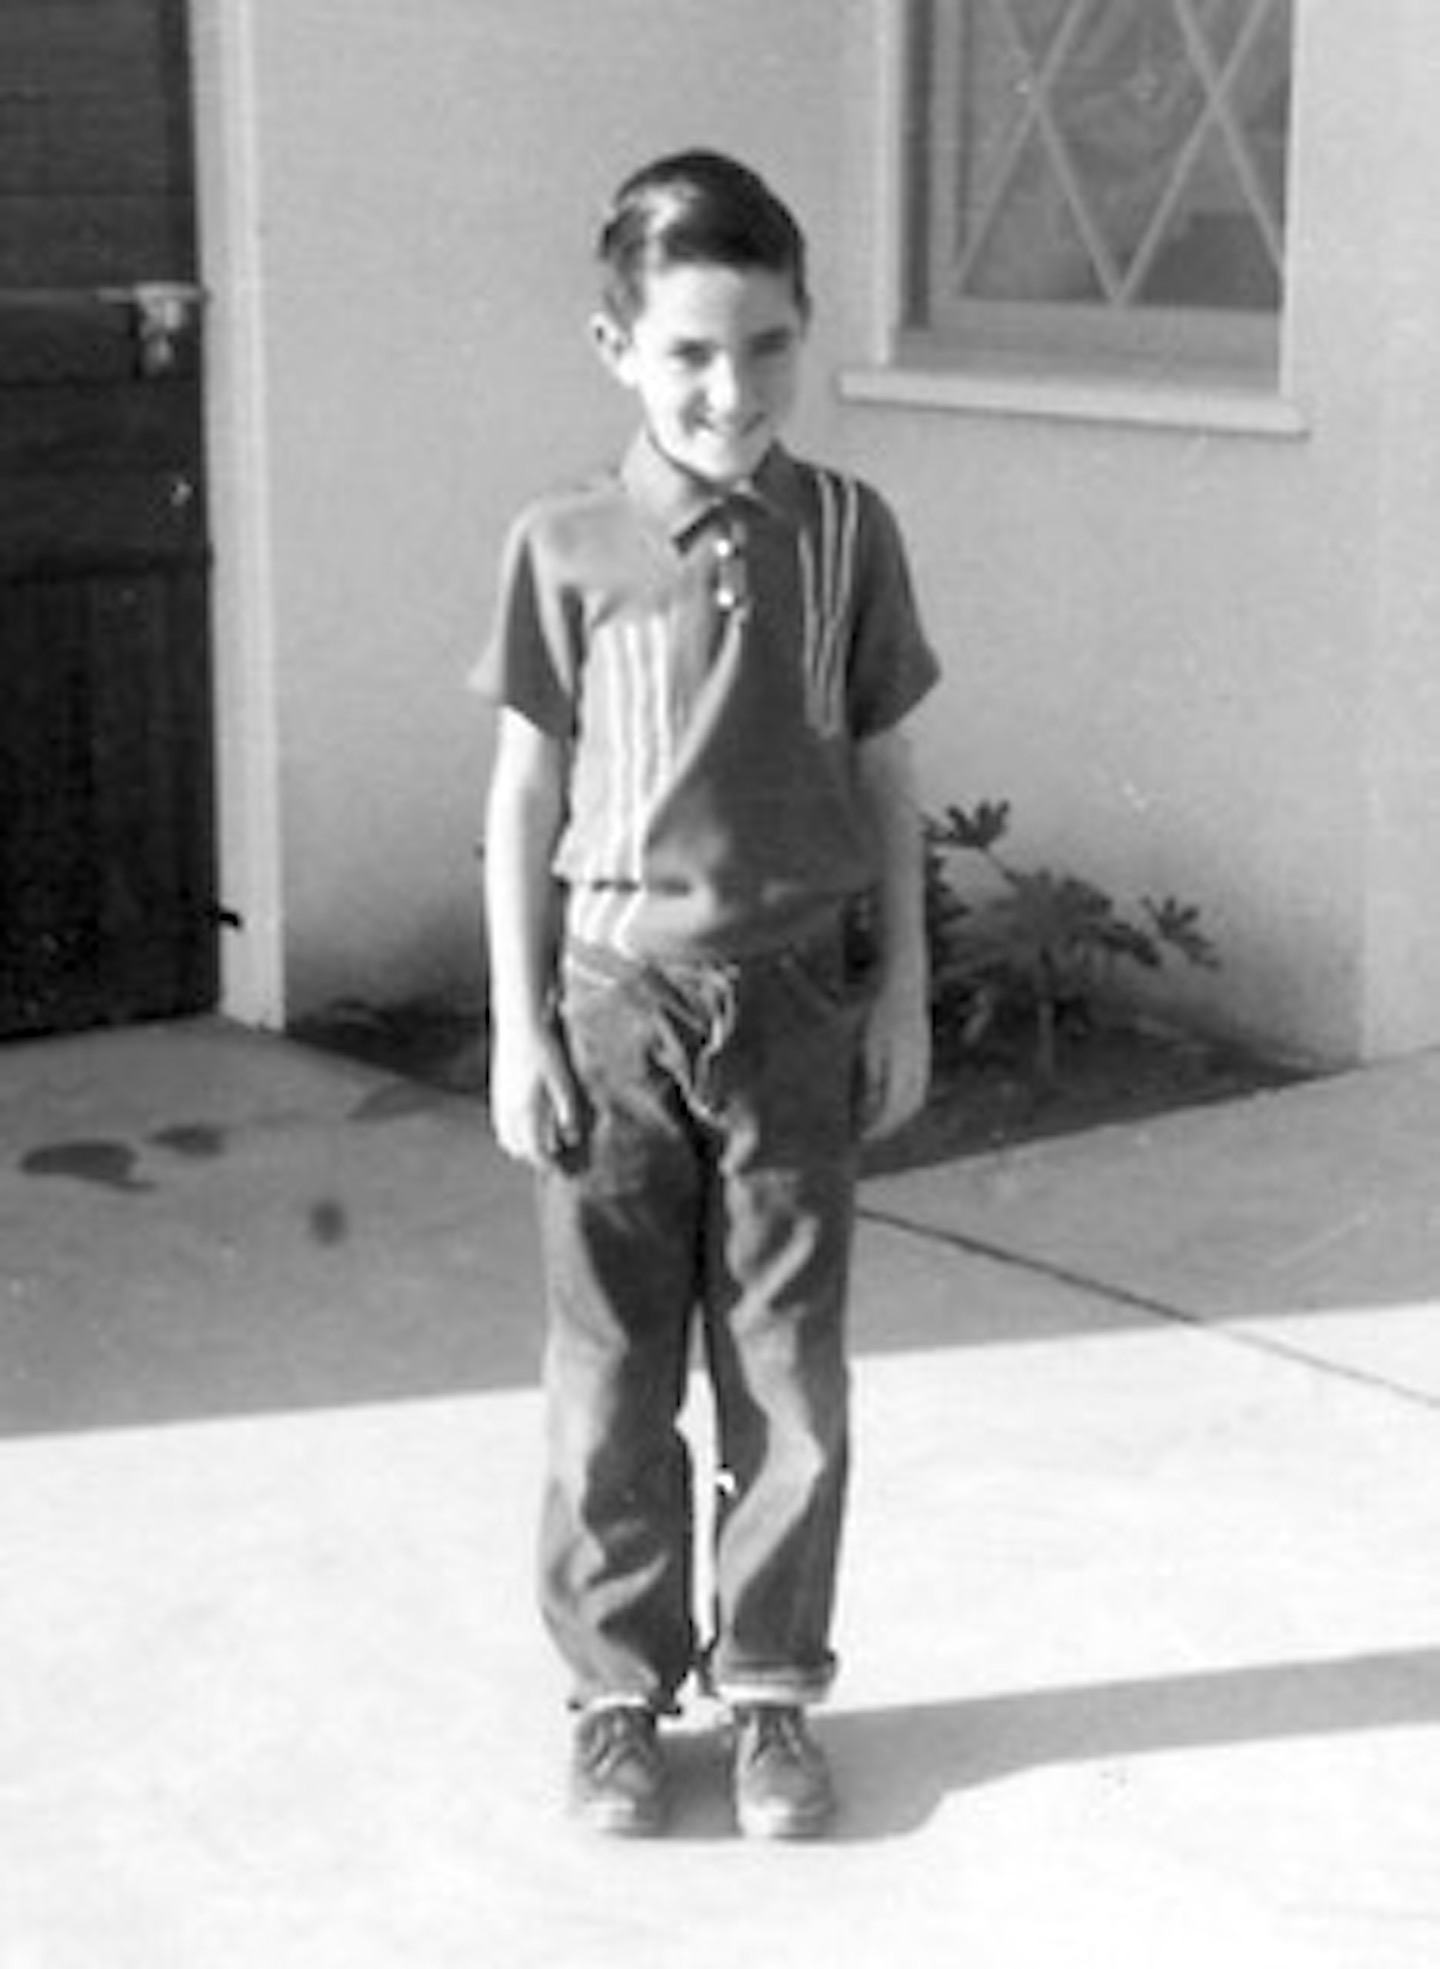 Ron, age 6, at his family’s new house in San Diego, CA, 1953.